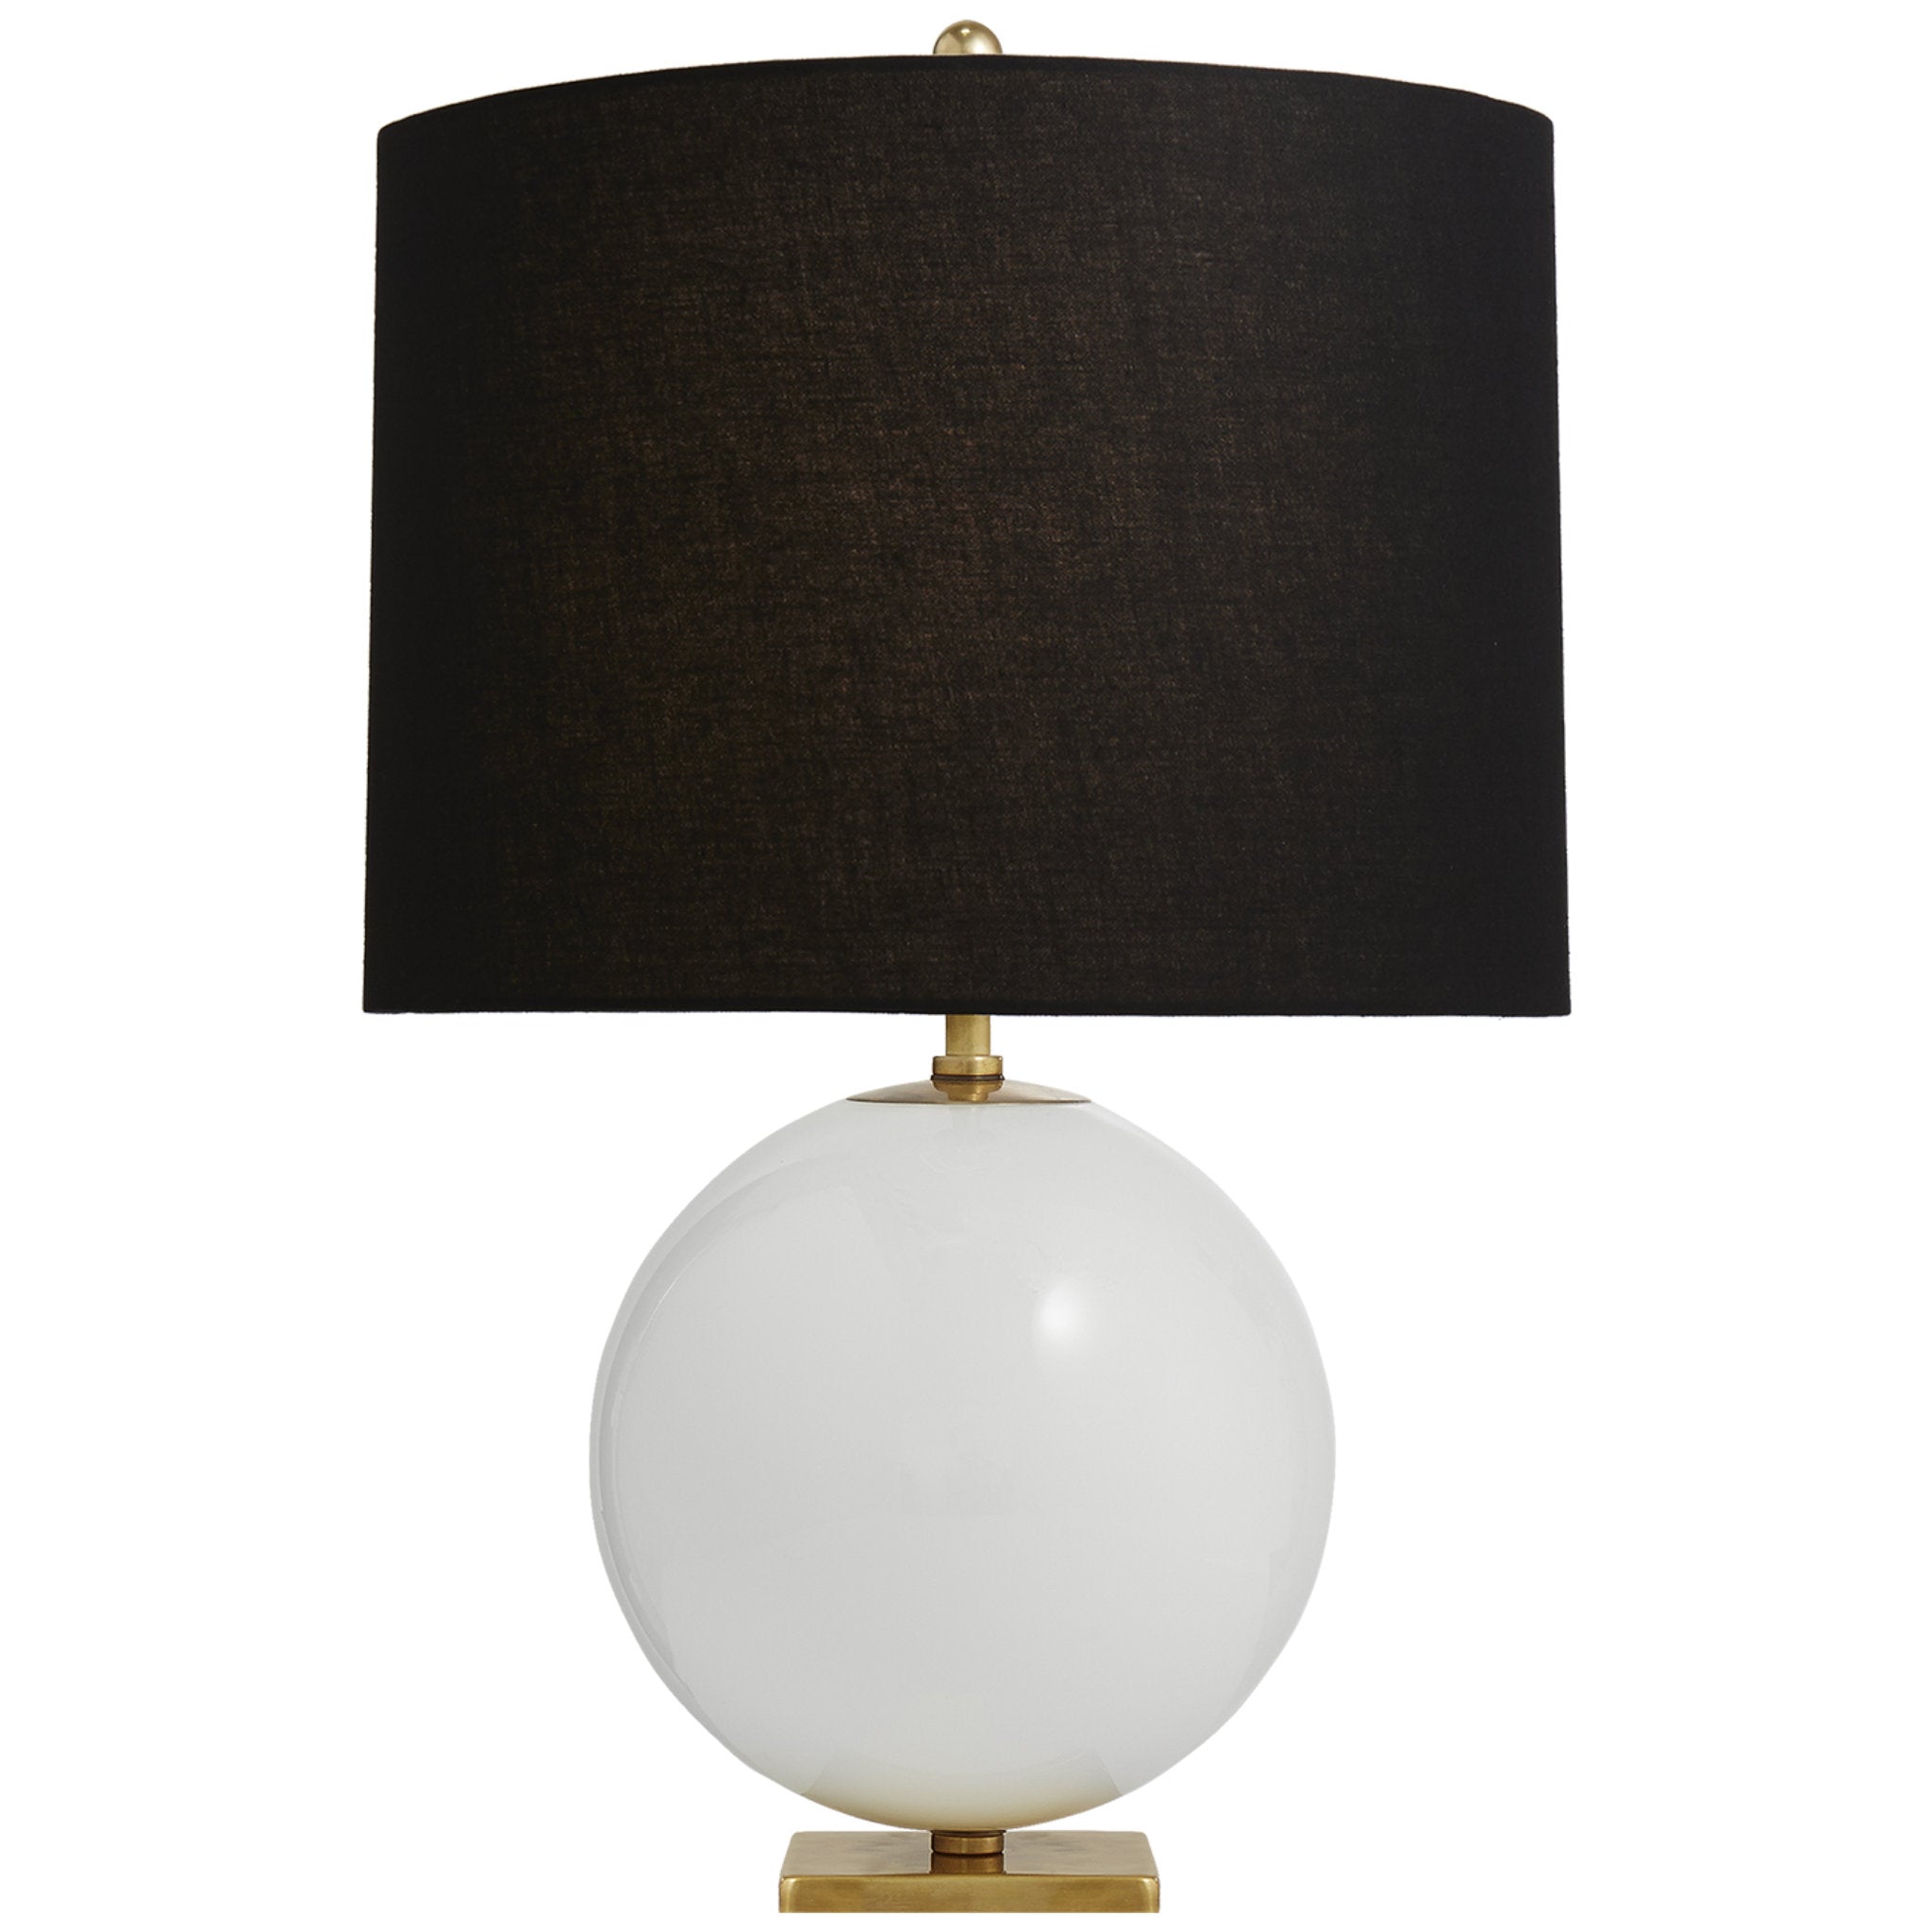 kate spade new york Elsie Table Lamp in Cream Reverse Painted Glass with Black Linen Shade